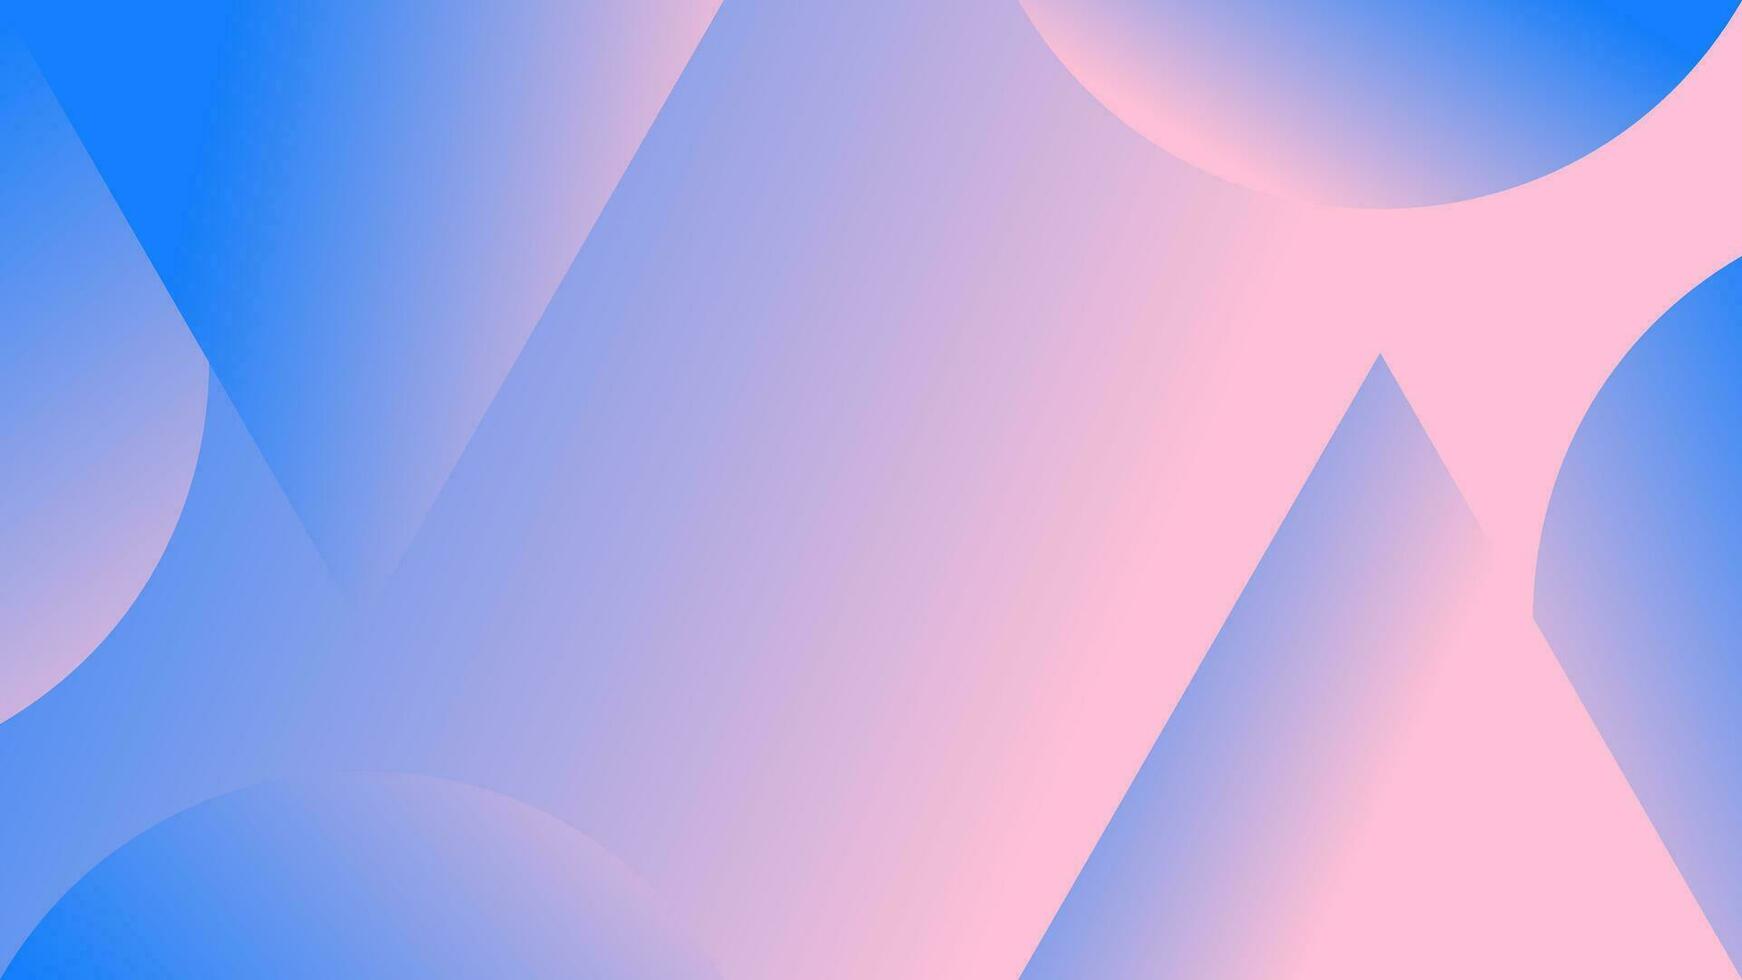 ABSTRACT GEOMETRIC BACKGROUND GRADIENT BLUE PINK COLOR DESIGN VECTOR TEMPLATE GOOD FOR MODERN WEBSITE, WALLPAPER, COVER DESIGN